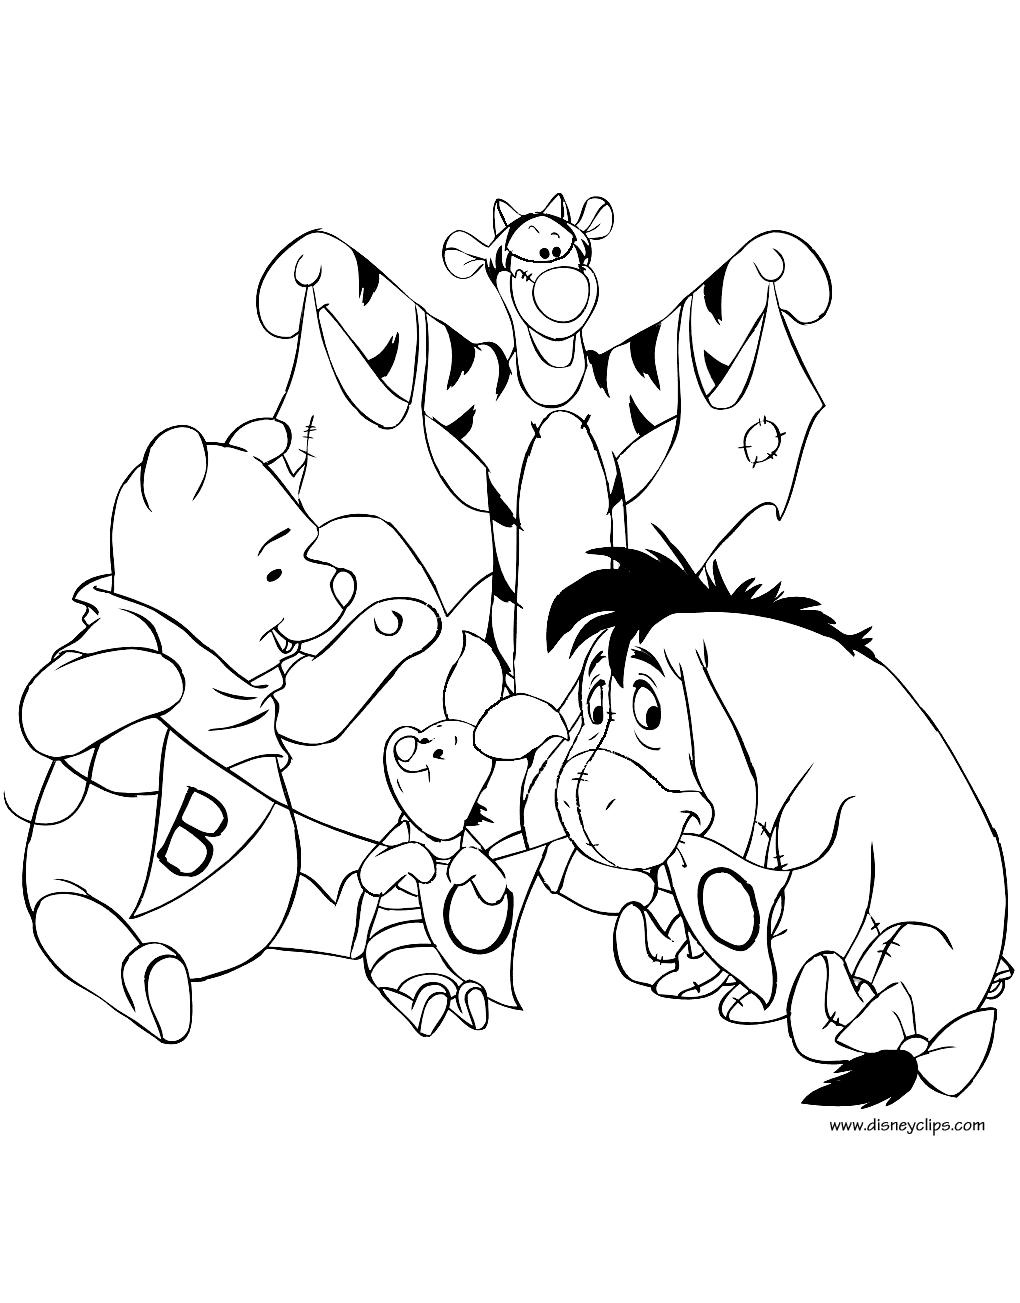 Disney Halloween Coloring Pages (2) | Disneyclips.com